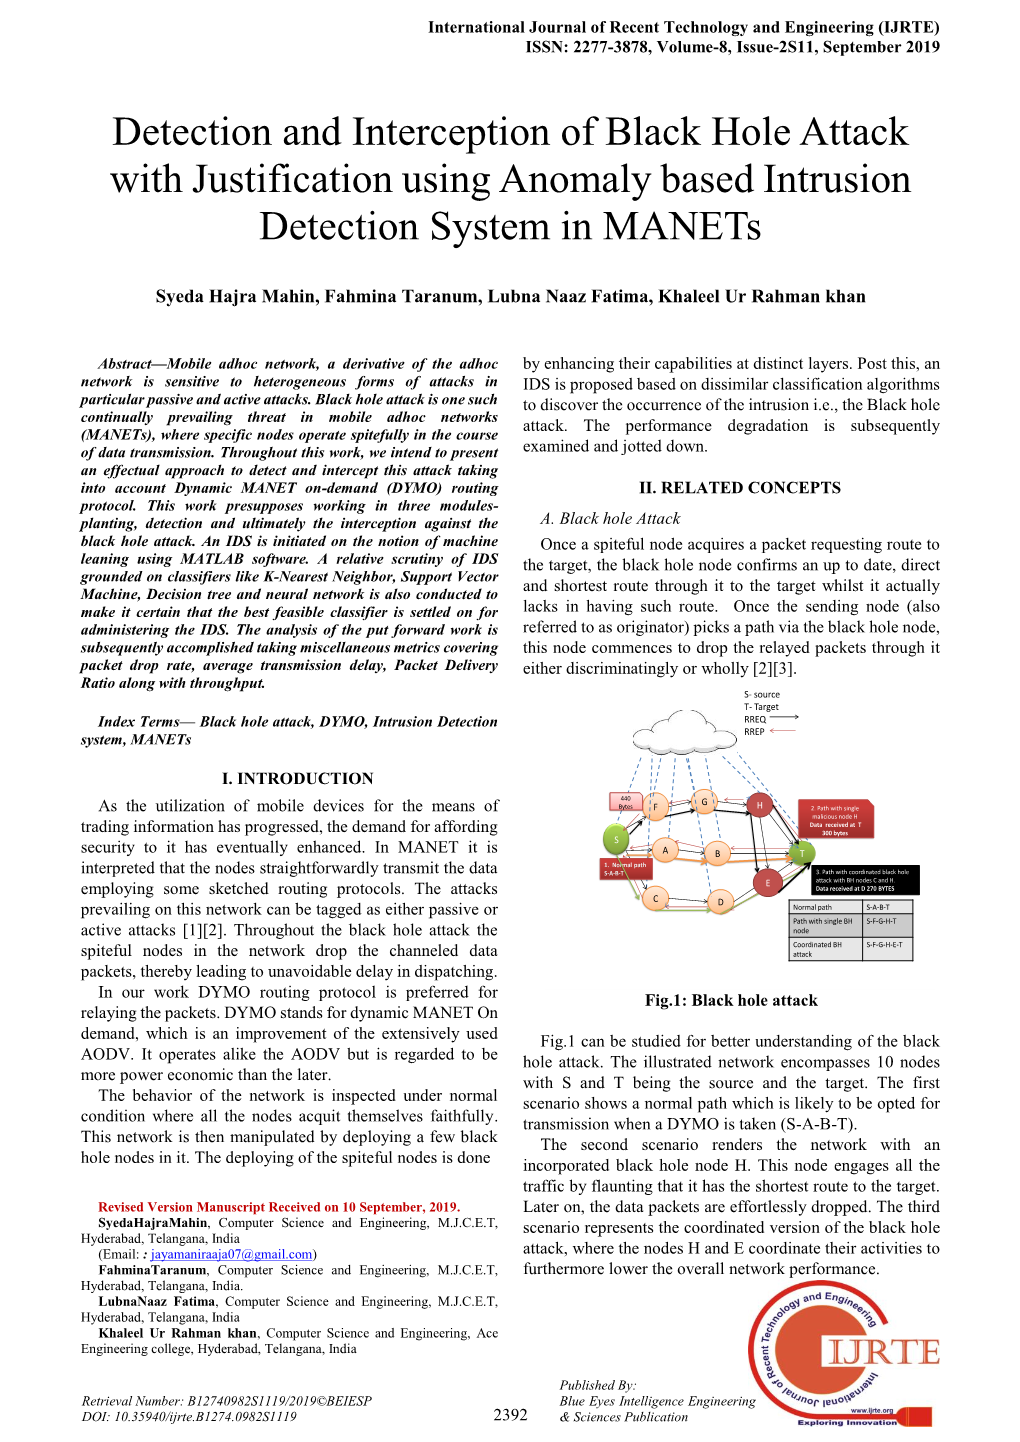 Detection and Interception of Black Hole Attack with Justification Using Anomaly Based Intrusion Detection System in Manets